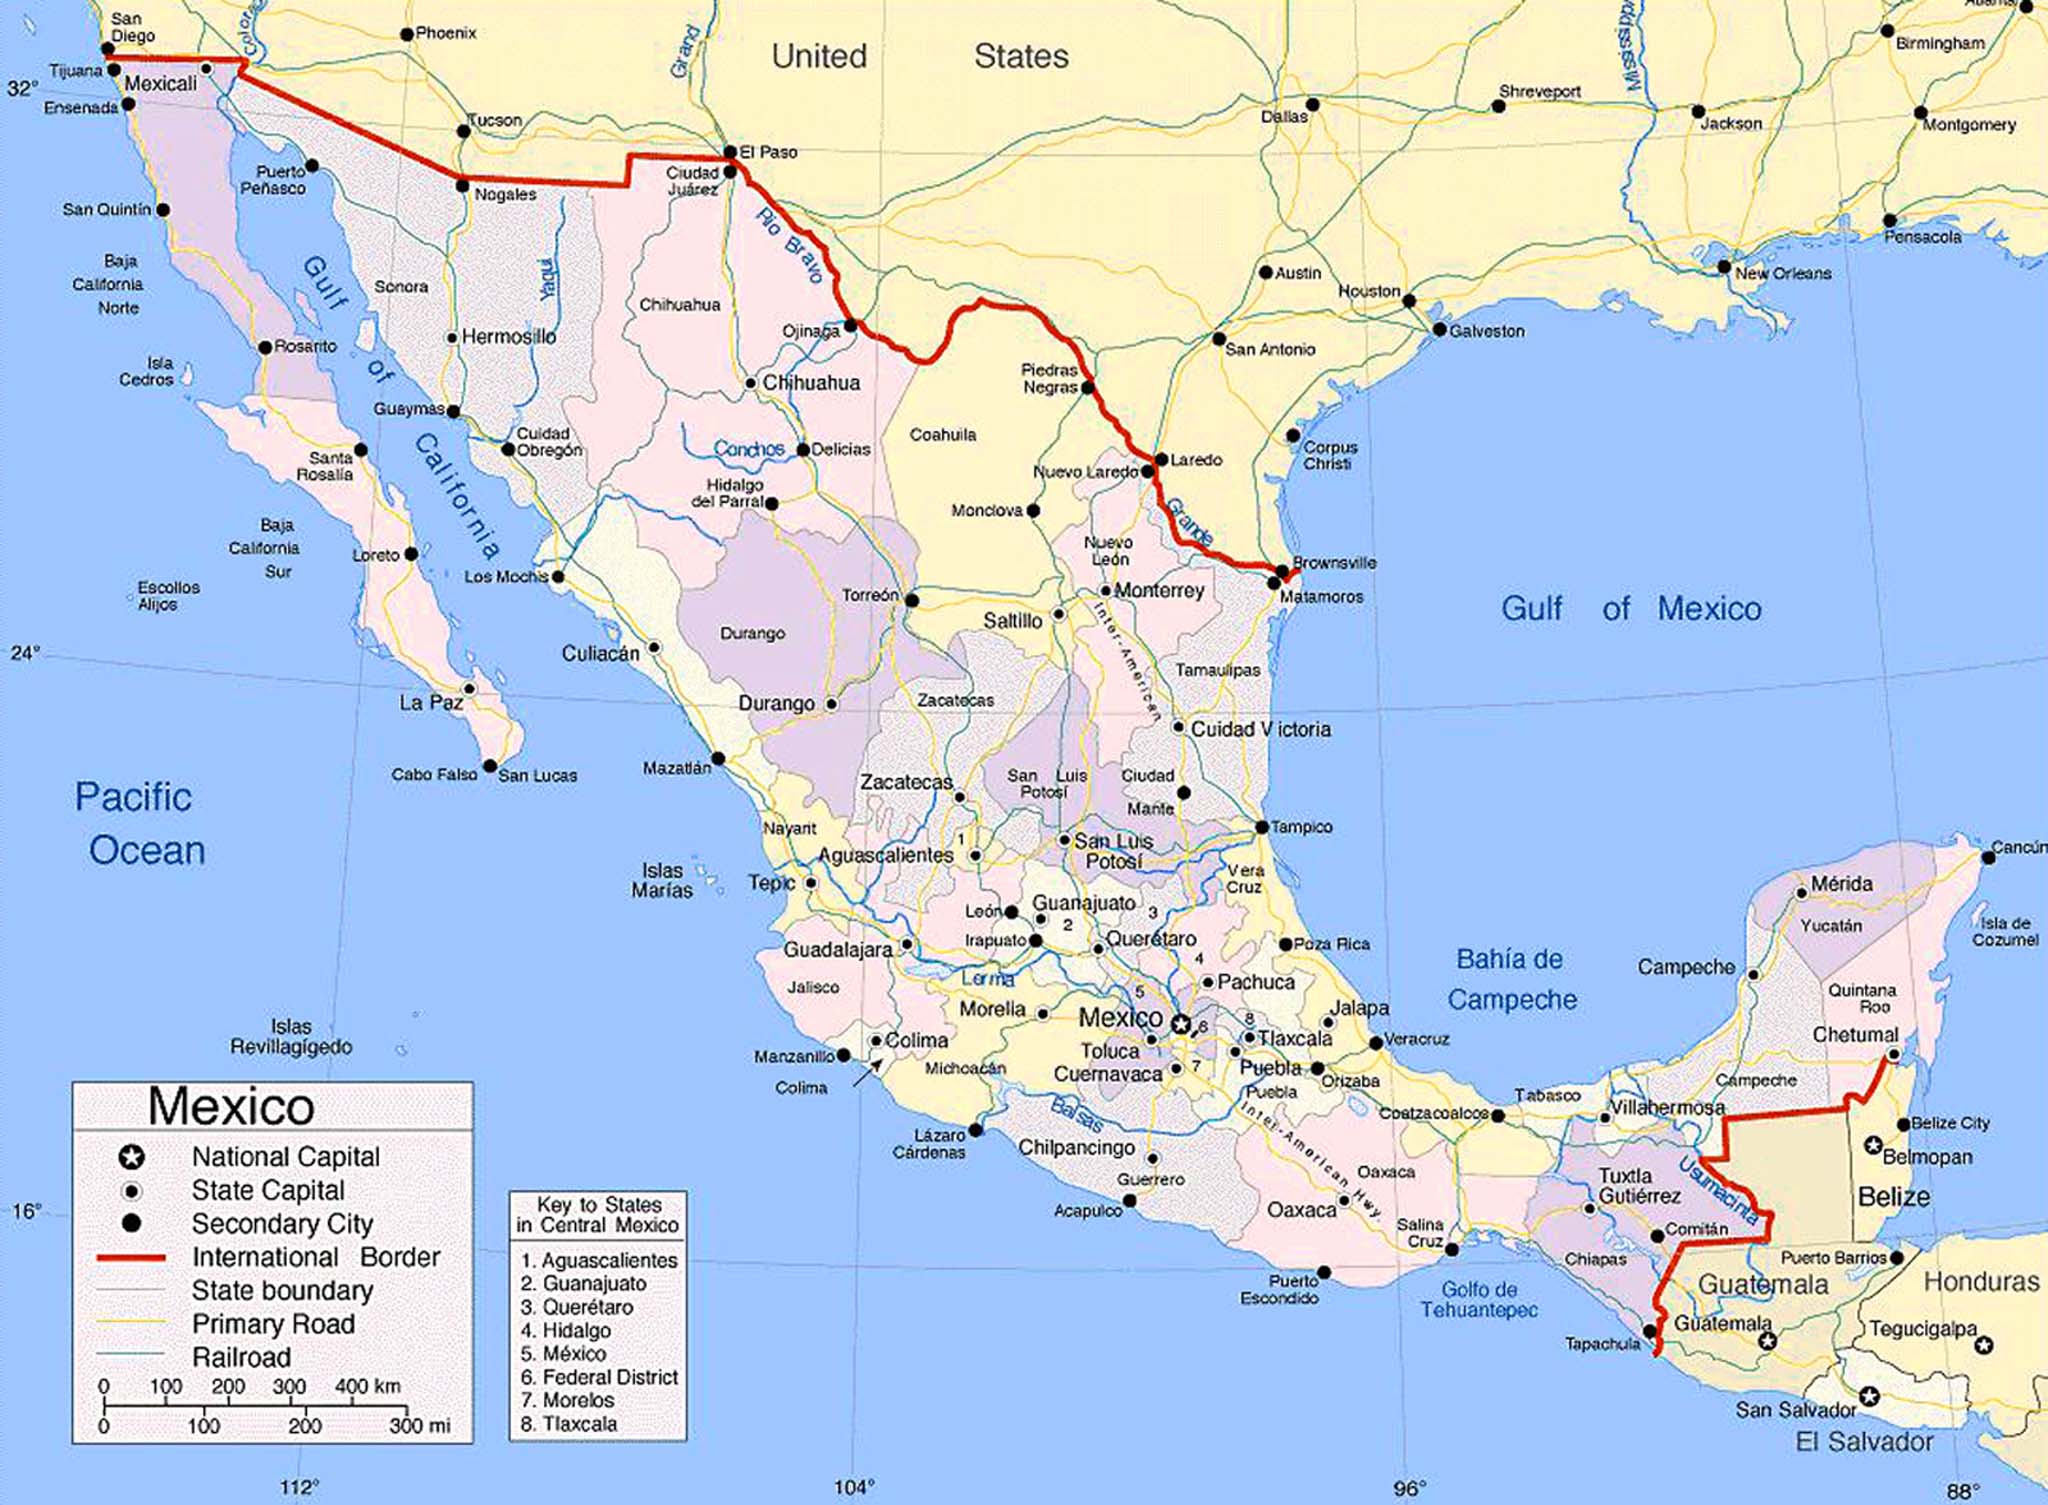 large-size-map-of-mexico-showing-the-cities-travel-around-the-world